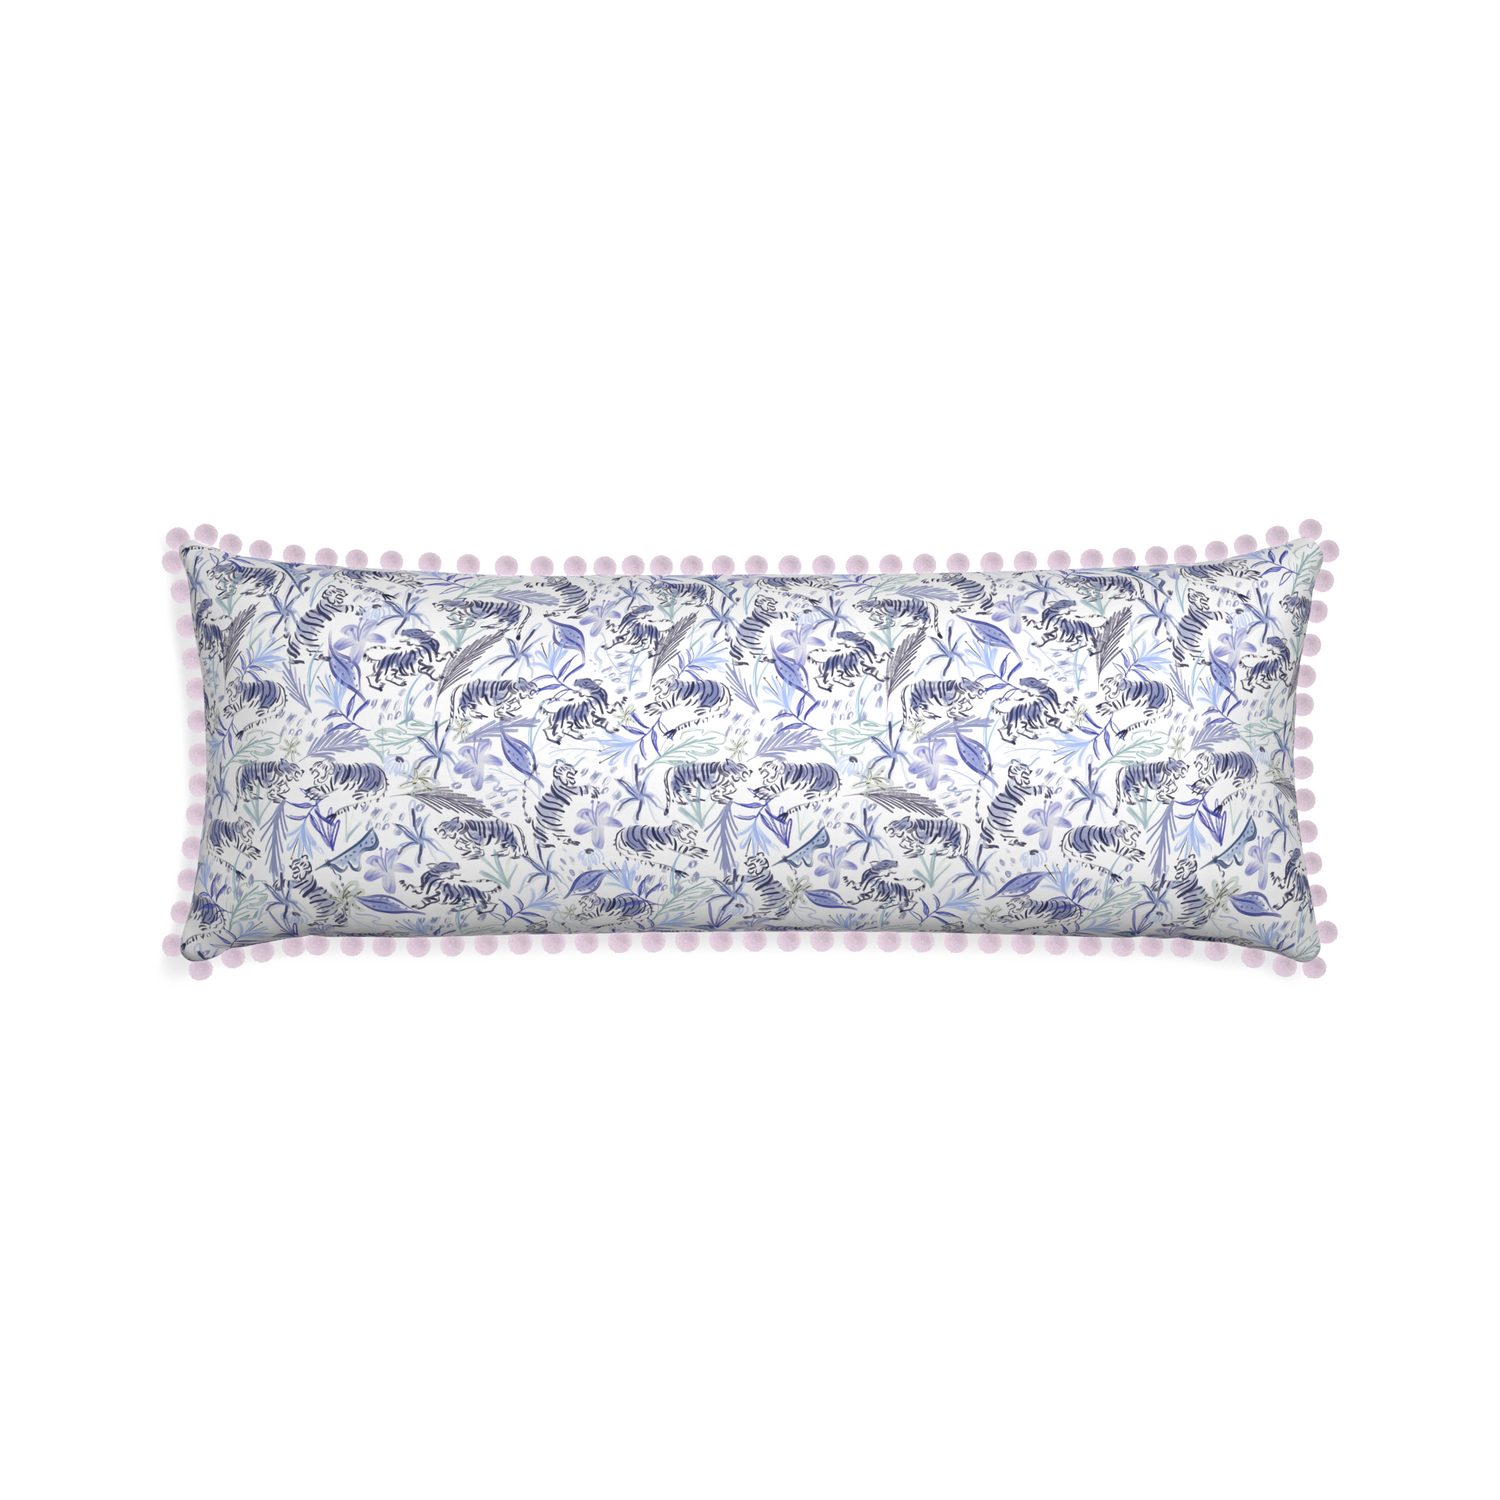 Xl-lumbar frida blue custom blue with intricate tiger designpillow with l on white background